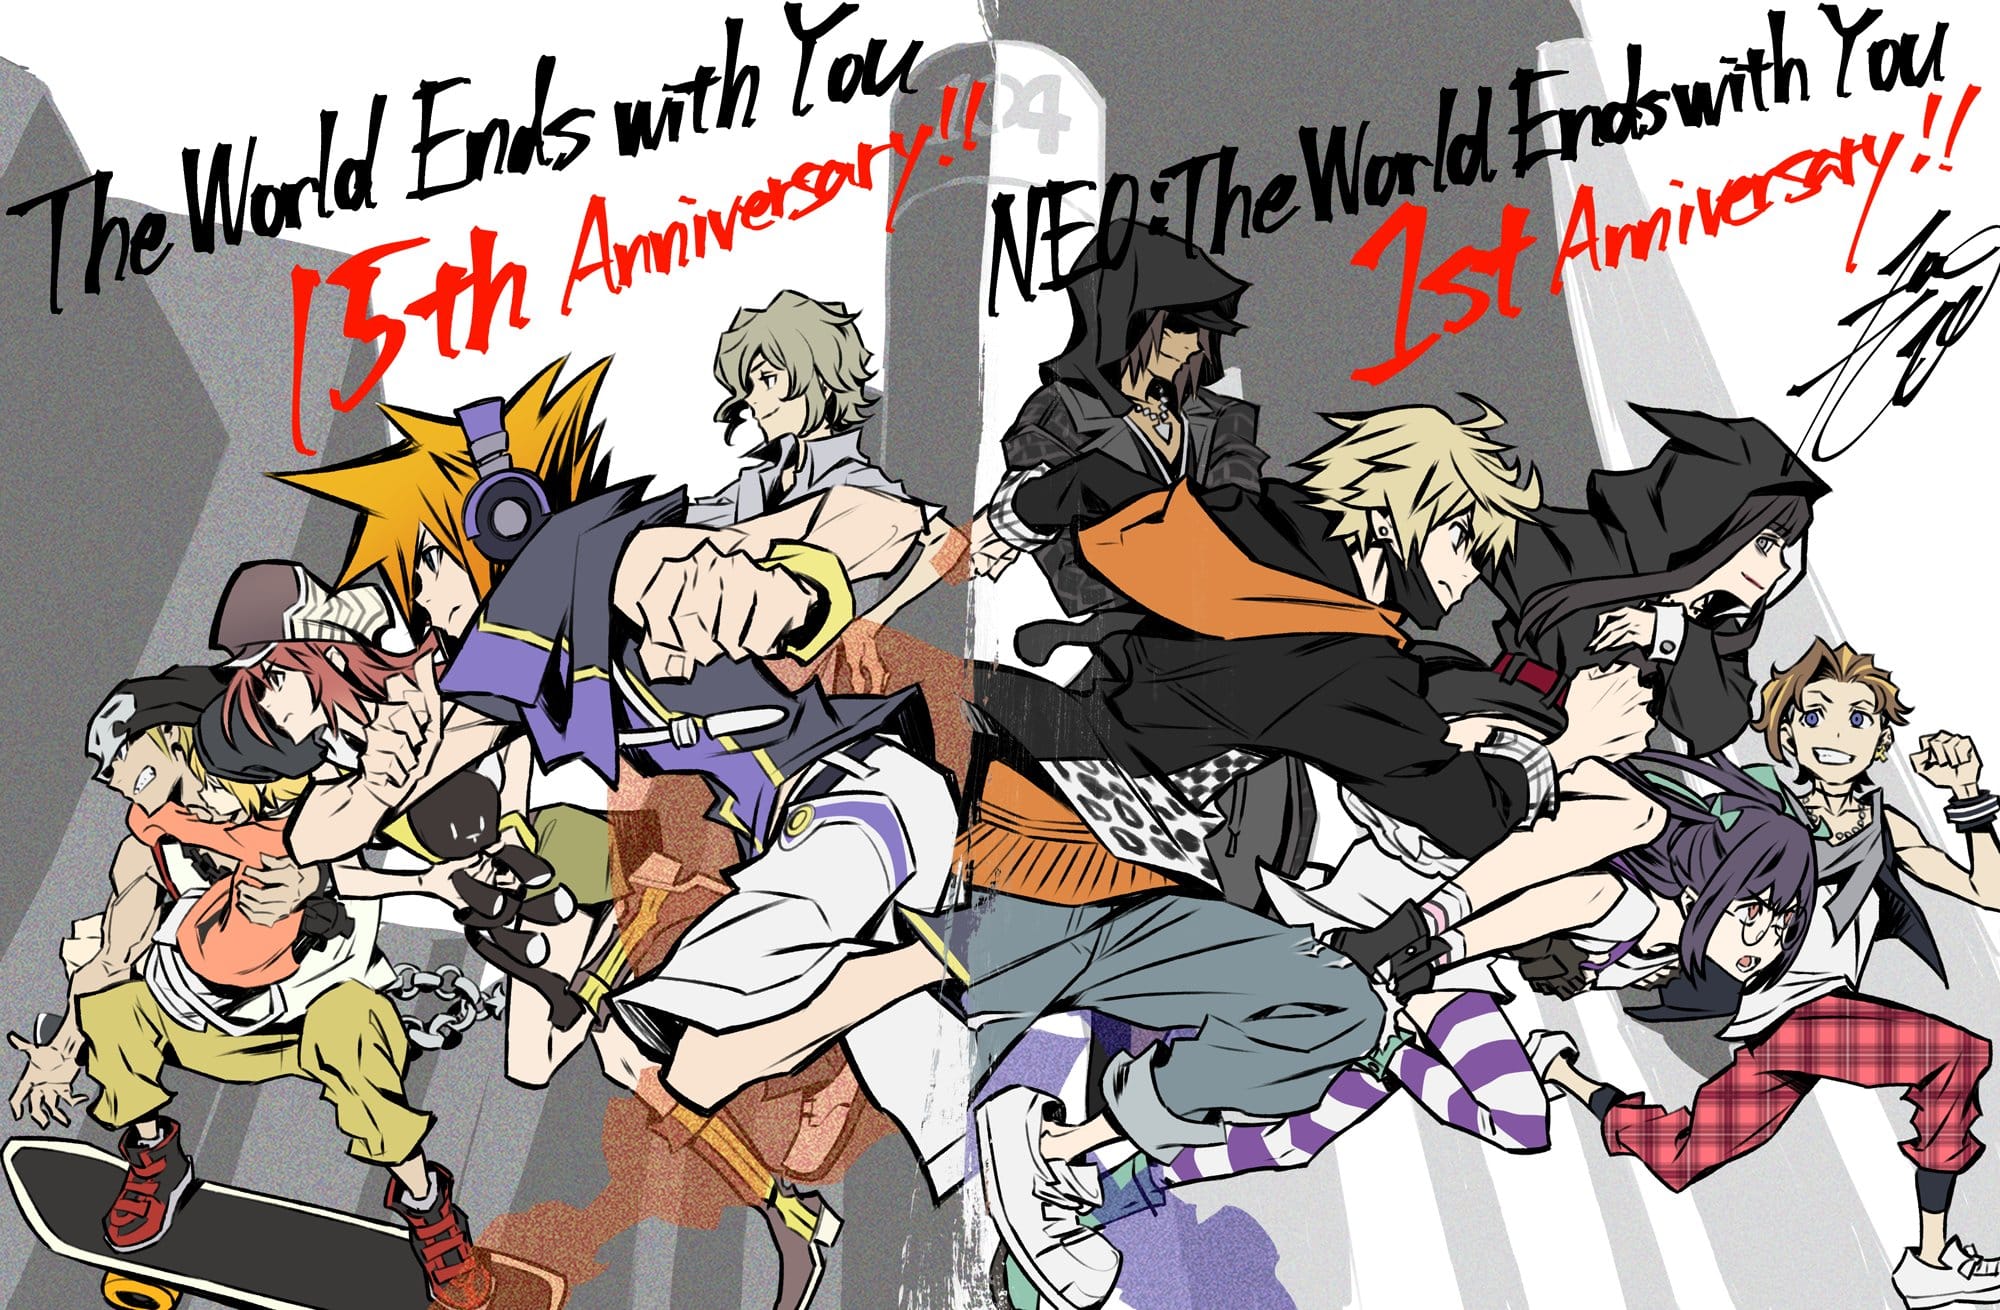 ‘The World Ends with You’ 15th Anniversary & ‘NEO: The World Ends with You’ 1-Year Anniversary Illustration Shared